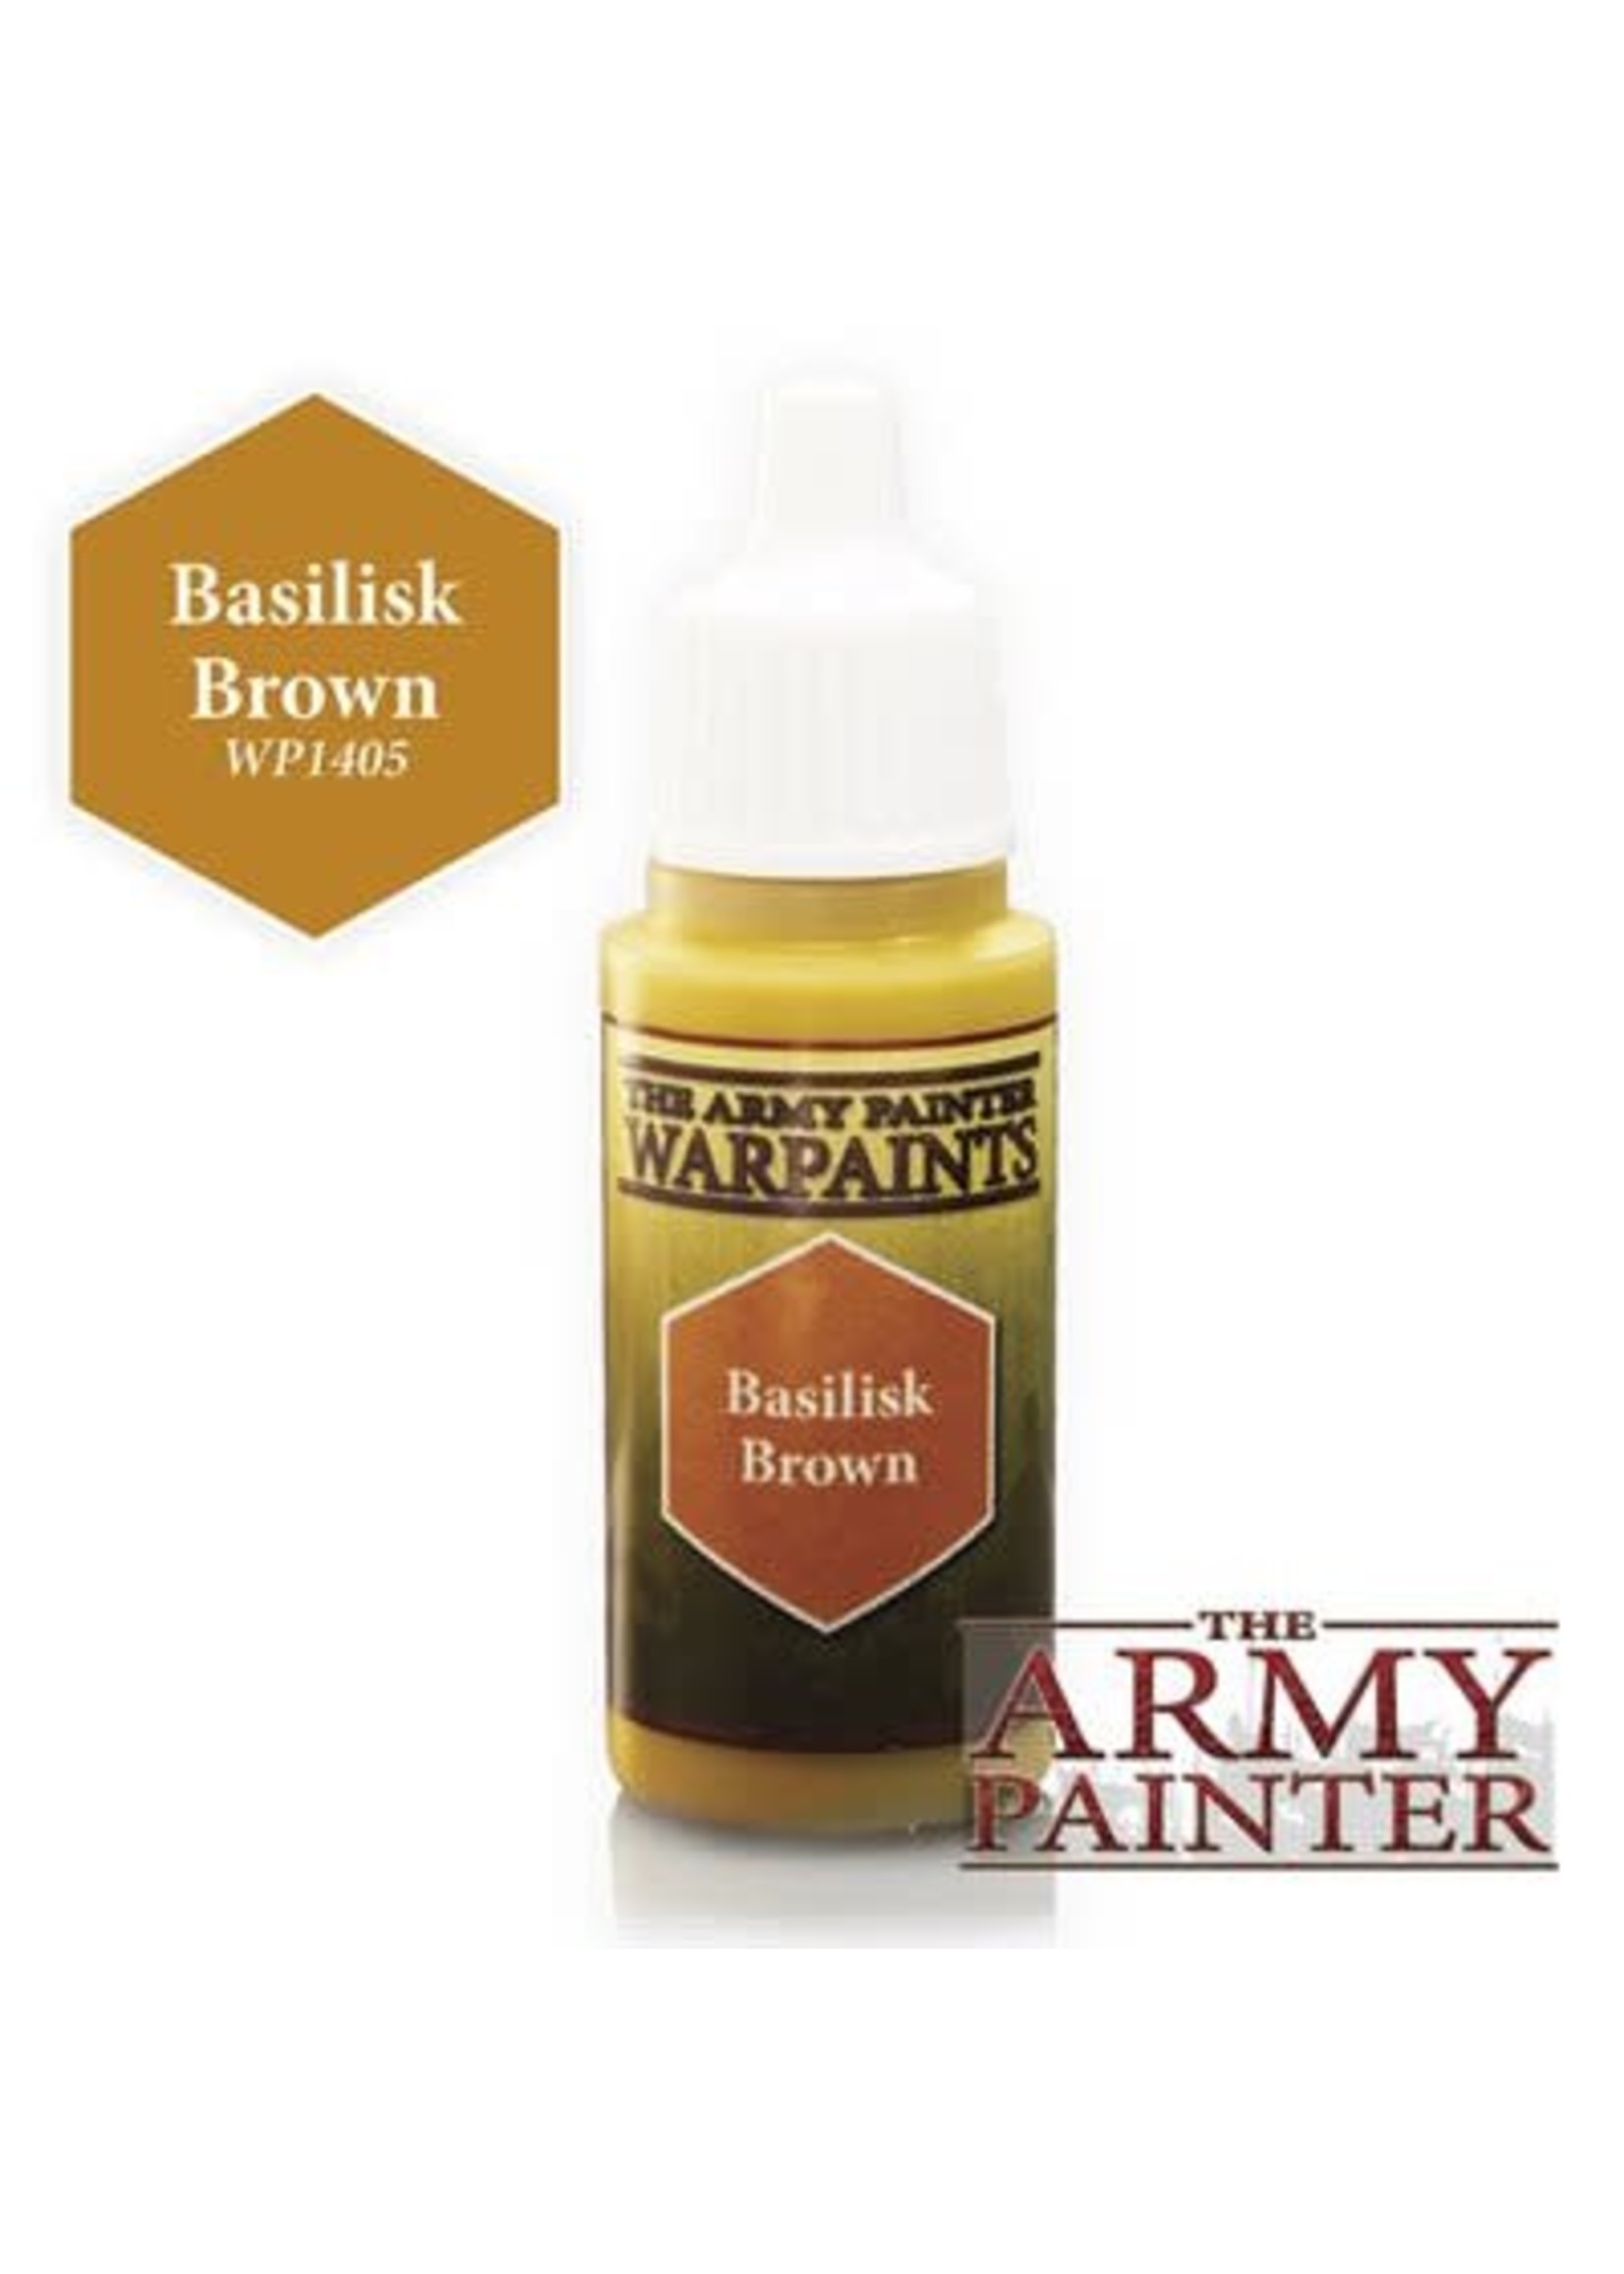 The Army Painter Basilisk Brown - Acrylic Warpaints - The Army Painter